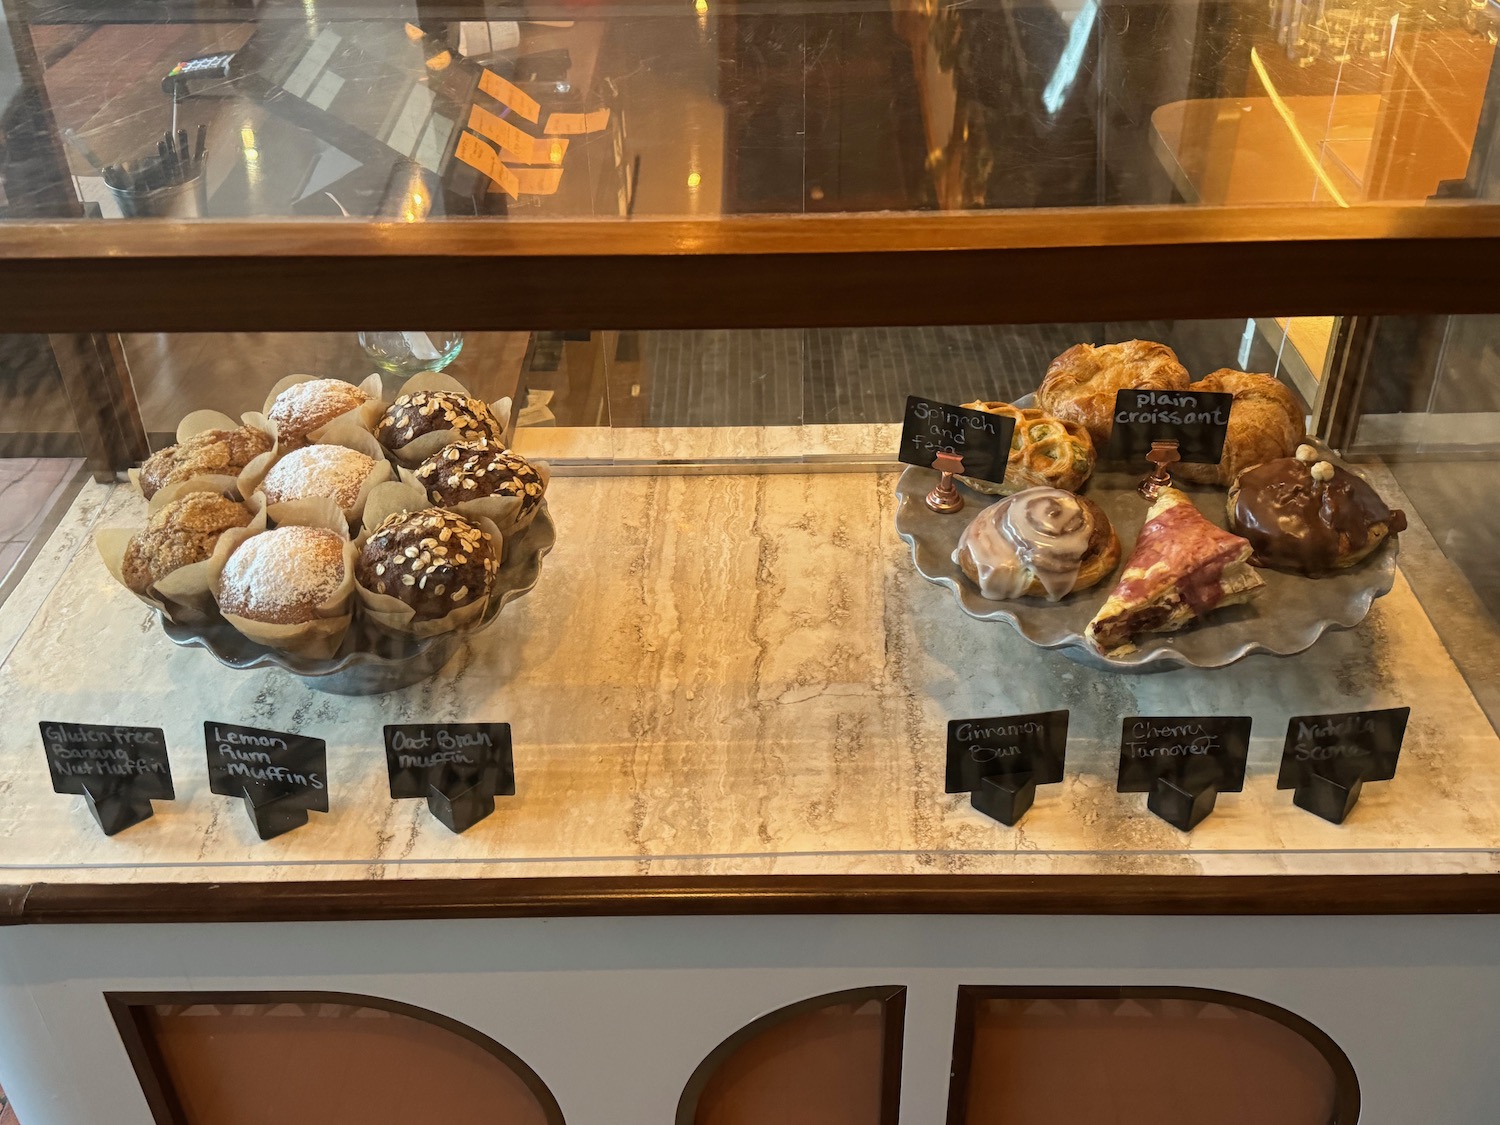 a display case with pastries and pastries